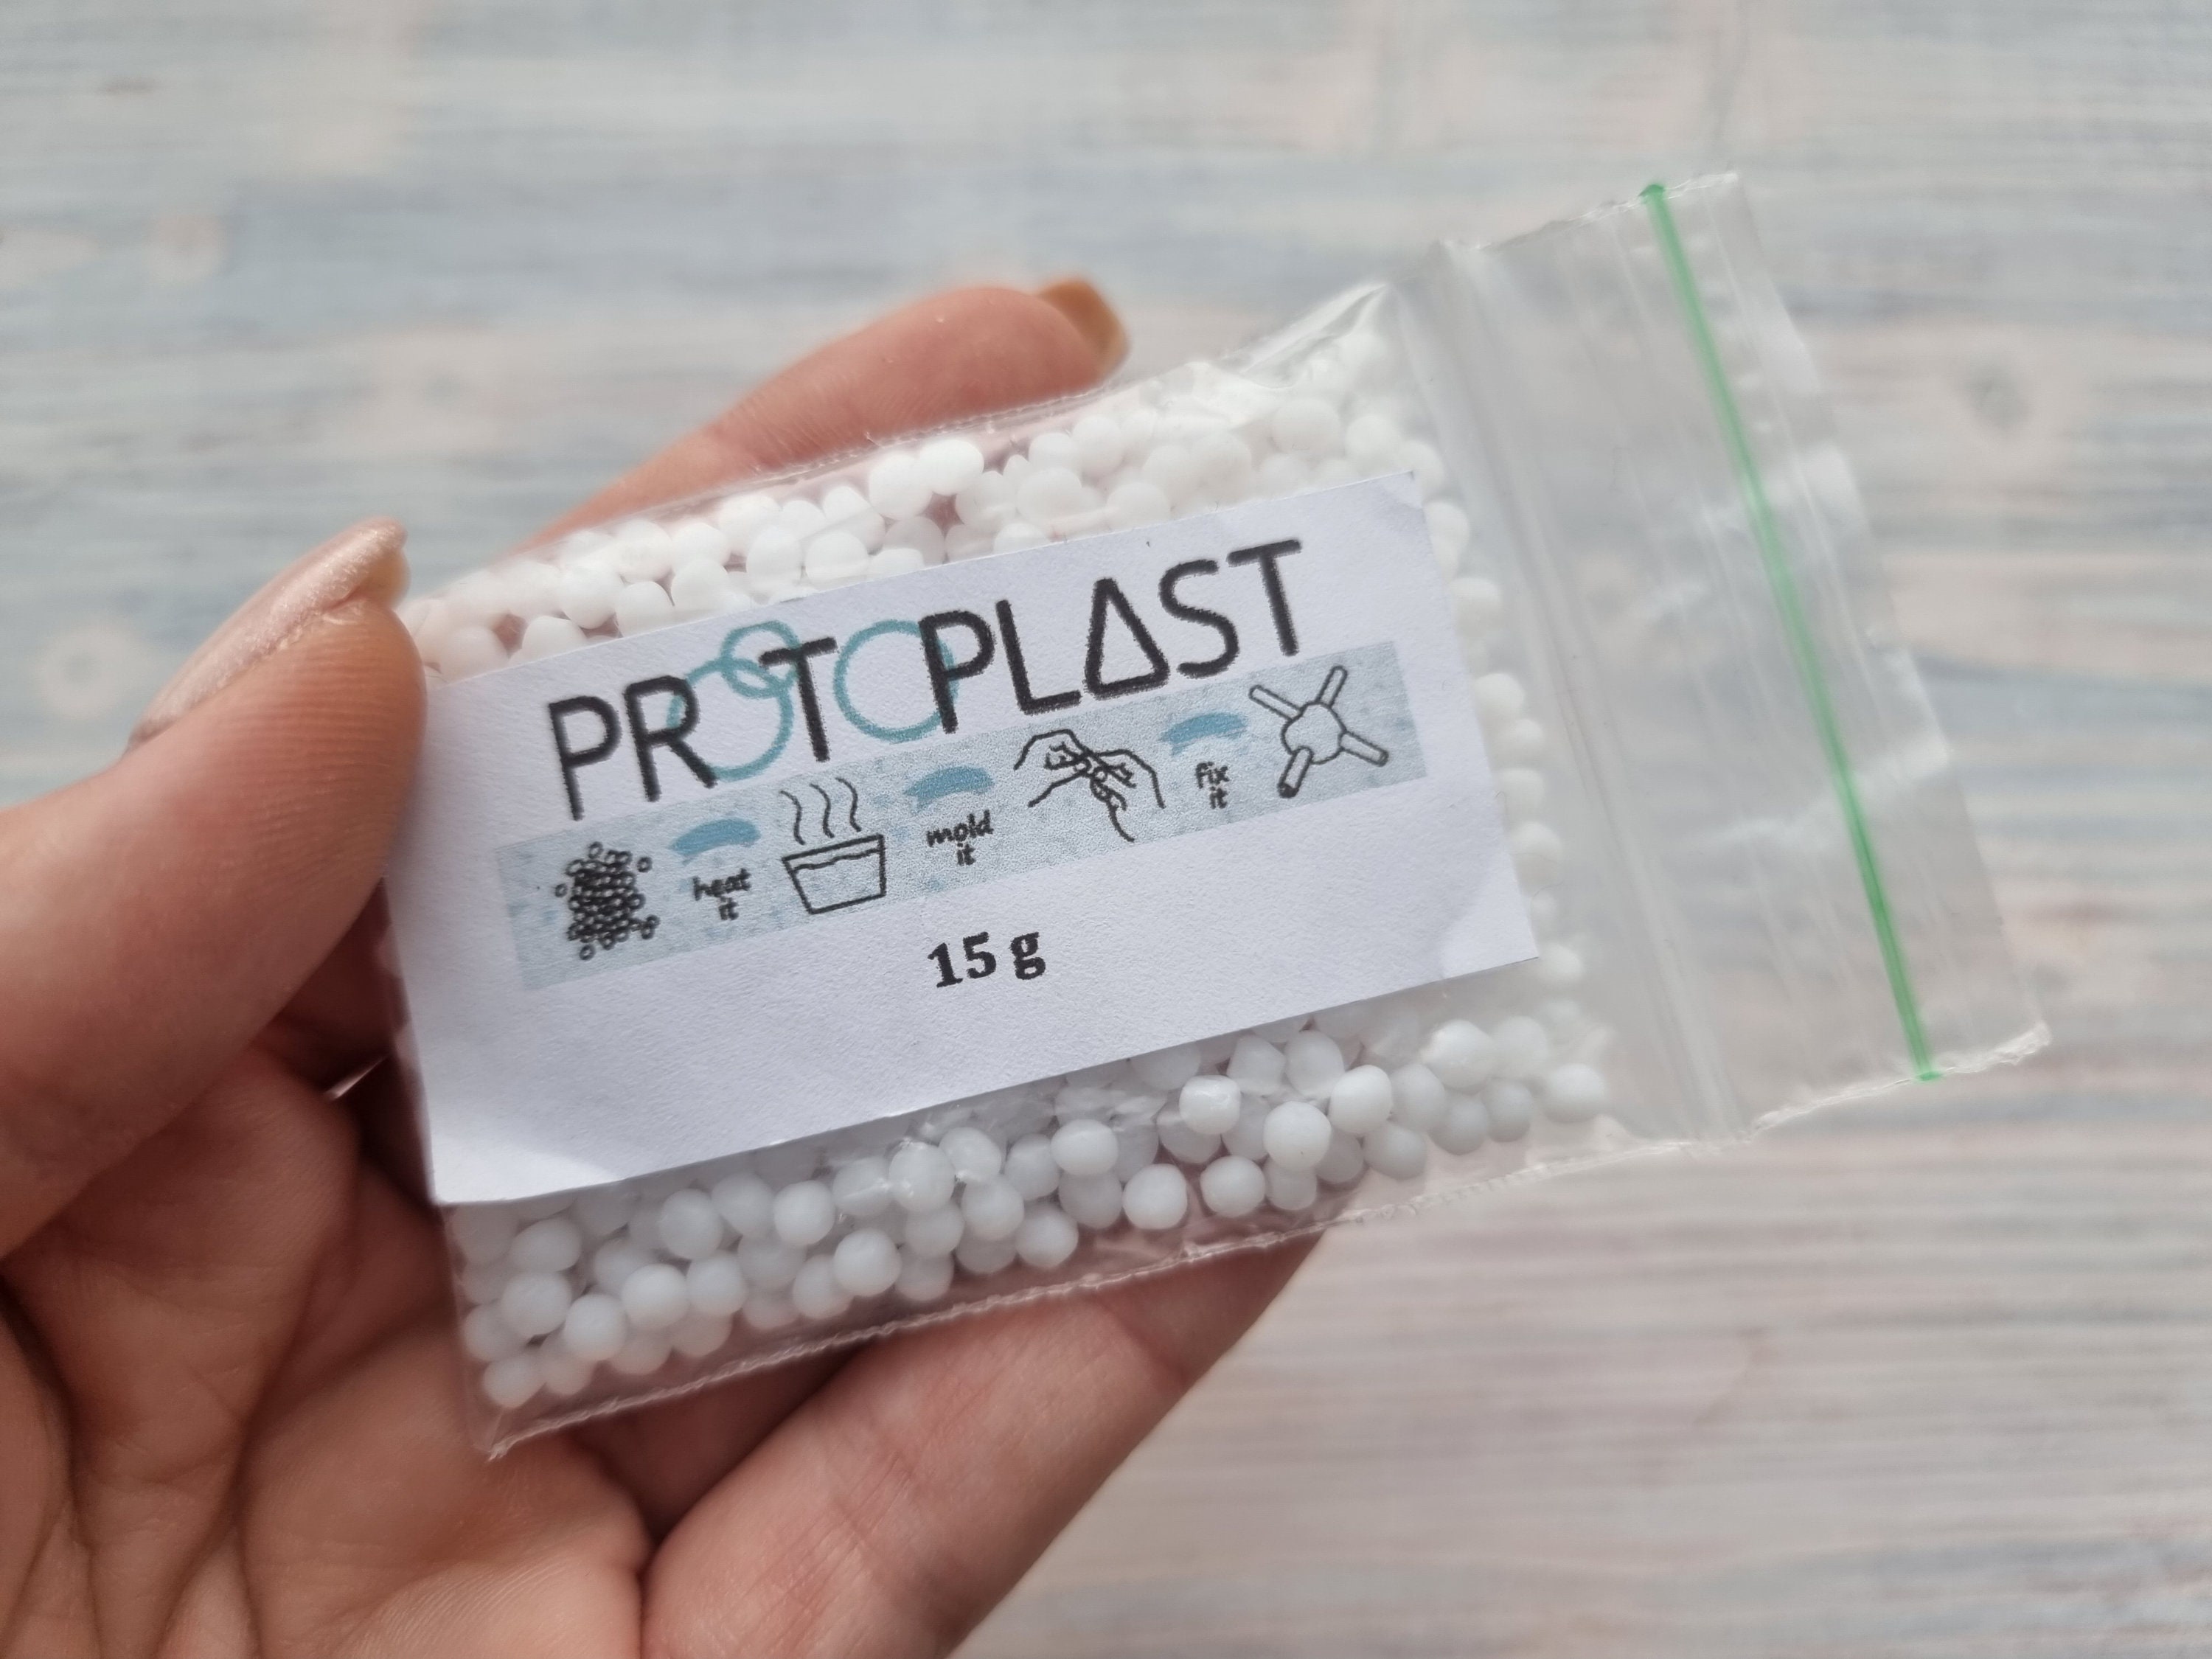 White Thermoplastic Beads, Plastic Pellets for Crafts, Cosplay